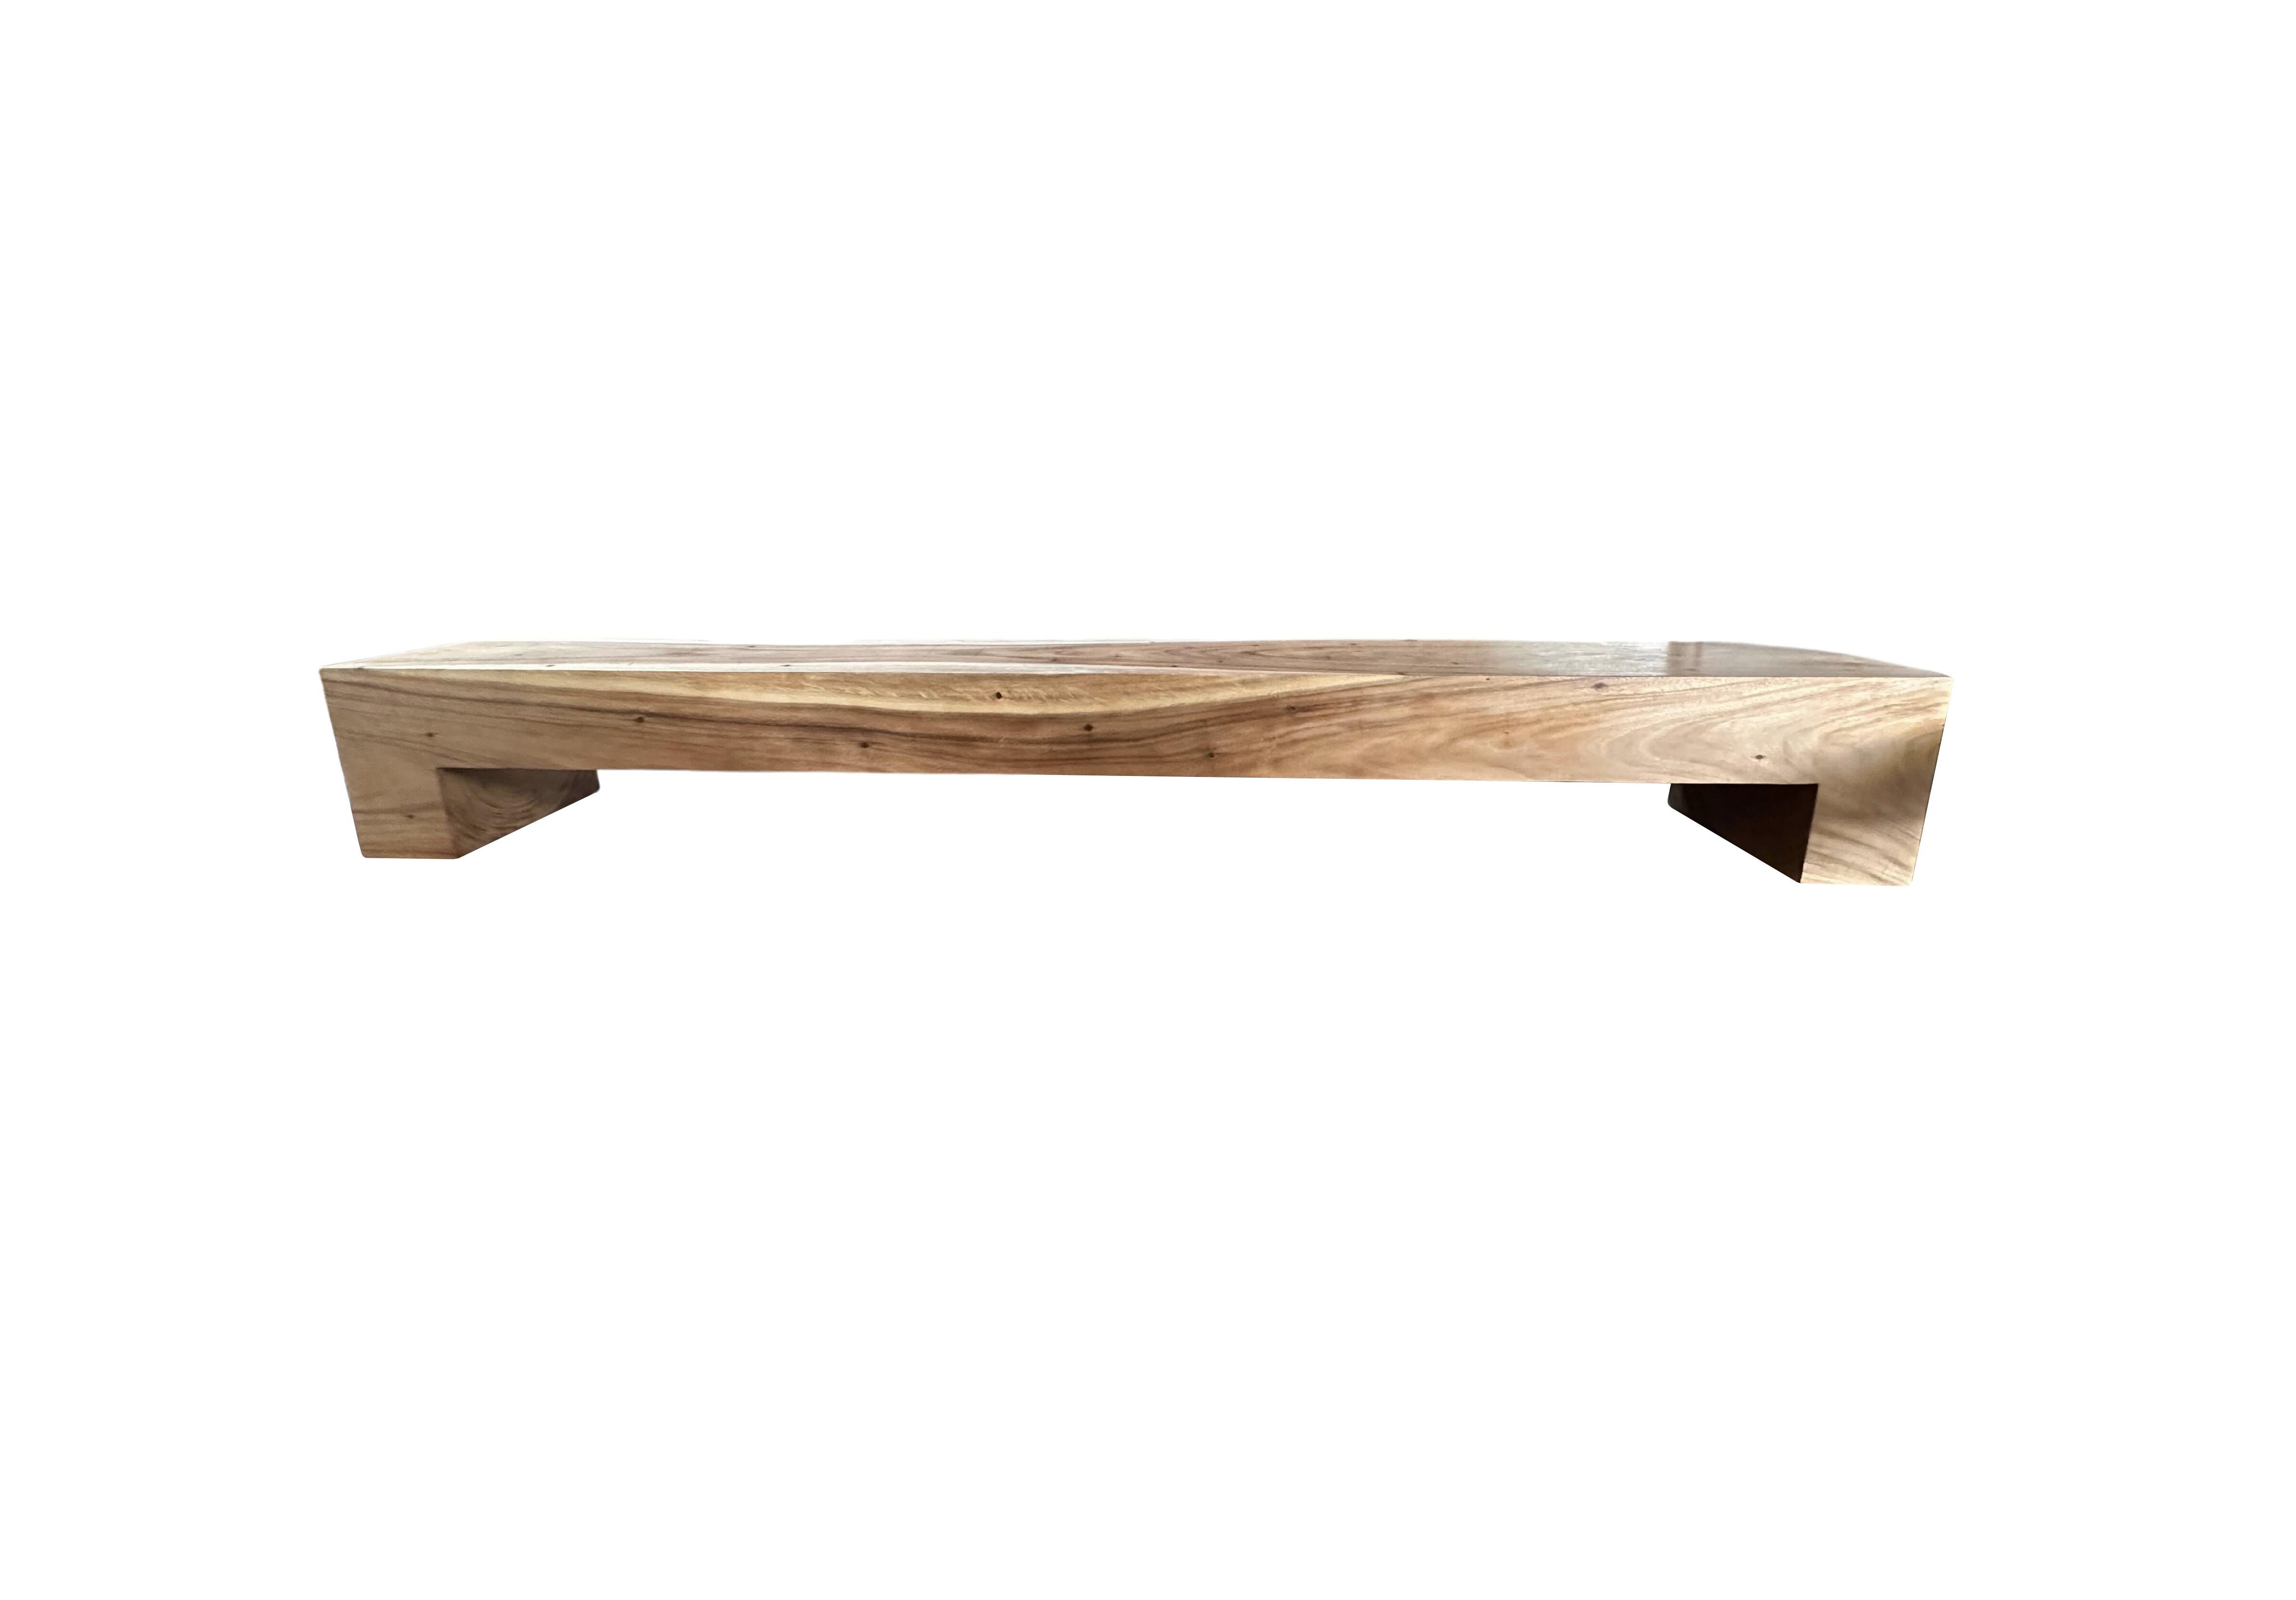 A sculptural suar wood bench carved from a single trunk. The bench is very wide at 118.11